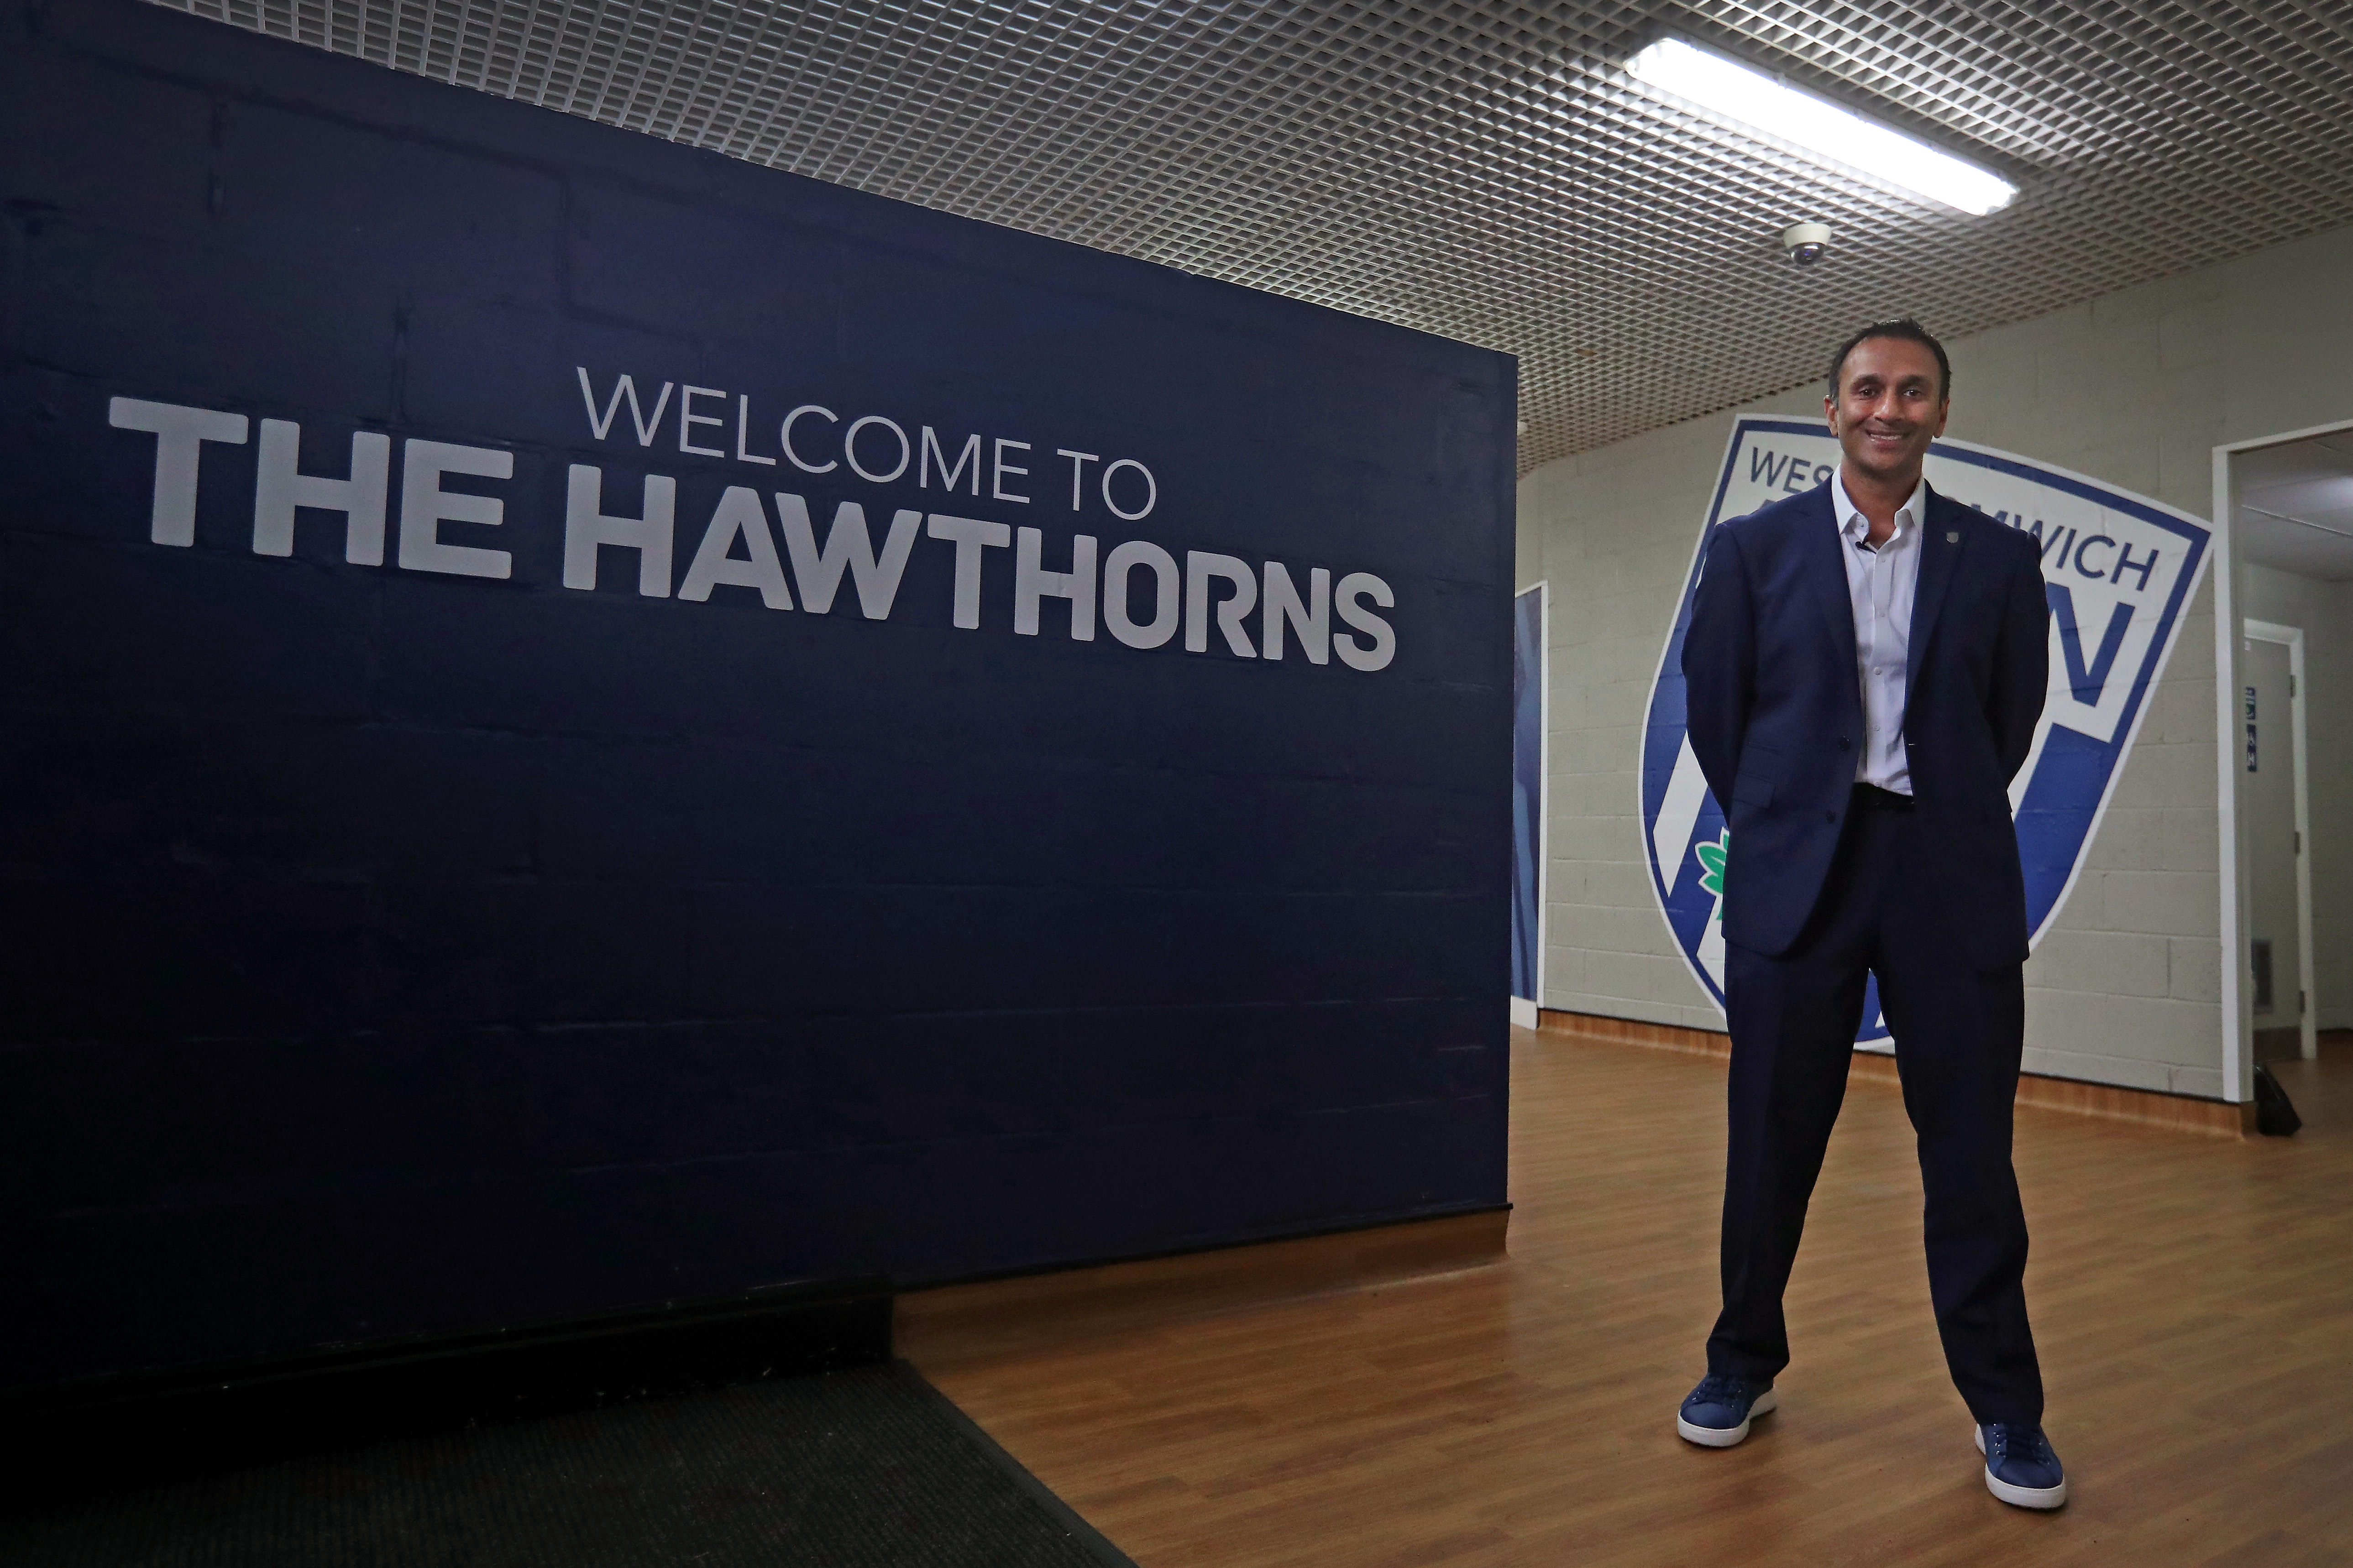 Shilen Patel stood in a suit next to a wall with "Welcome to The Hawthorns" written on it